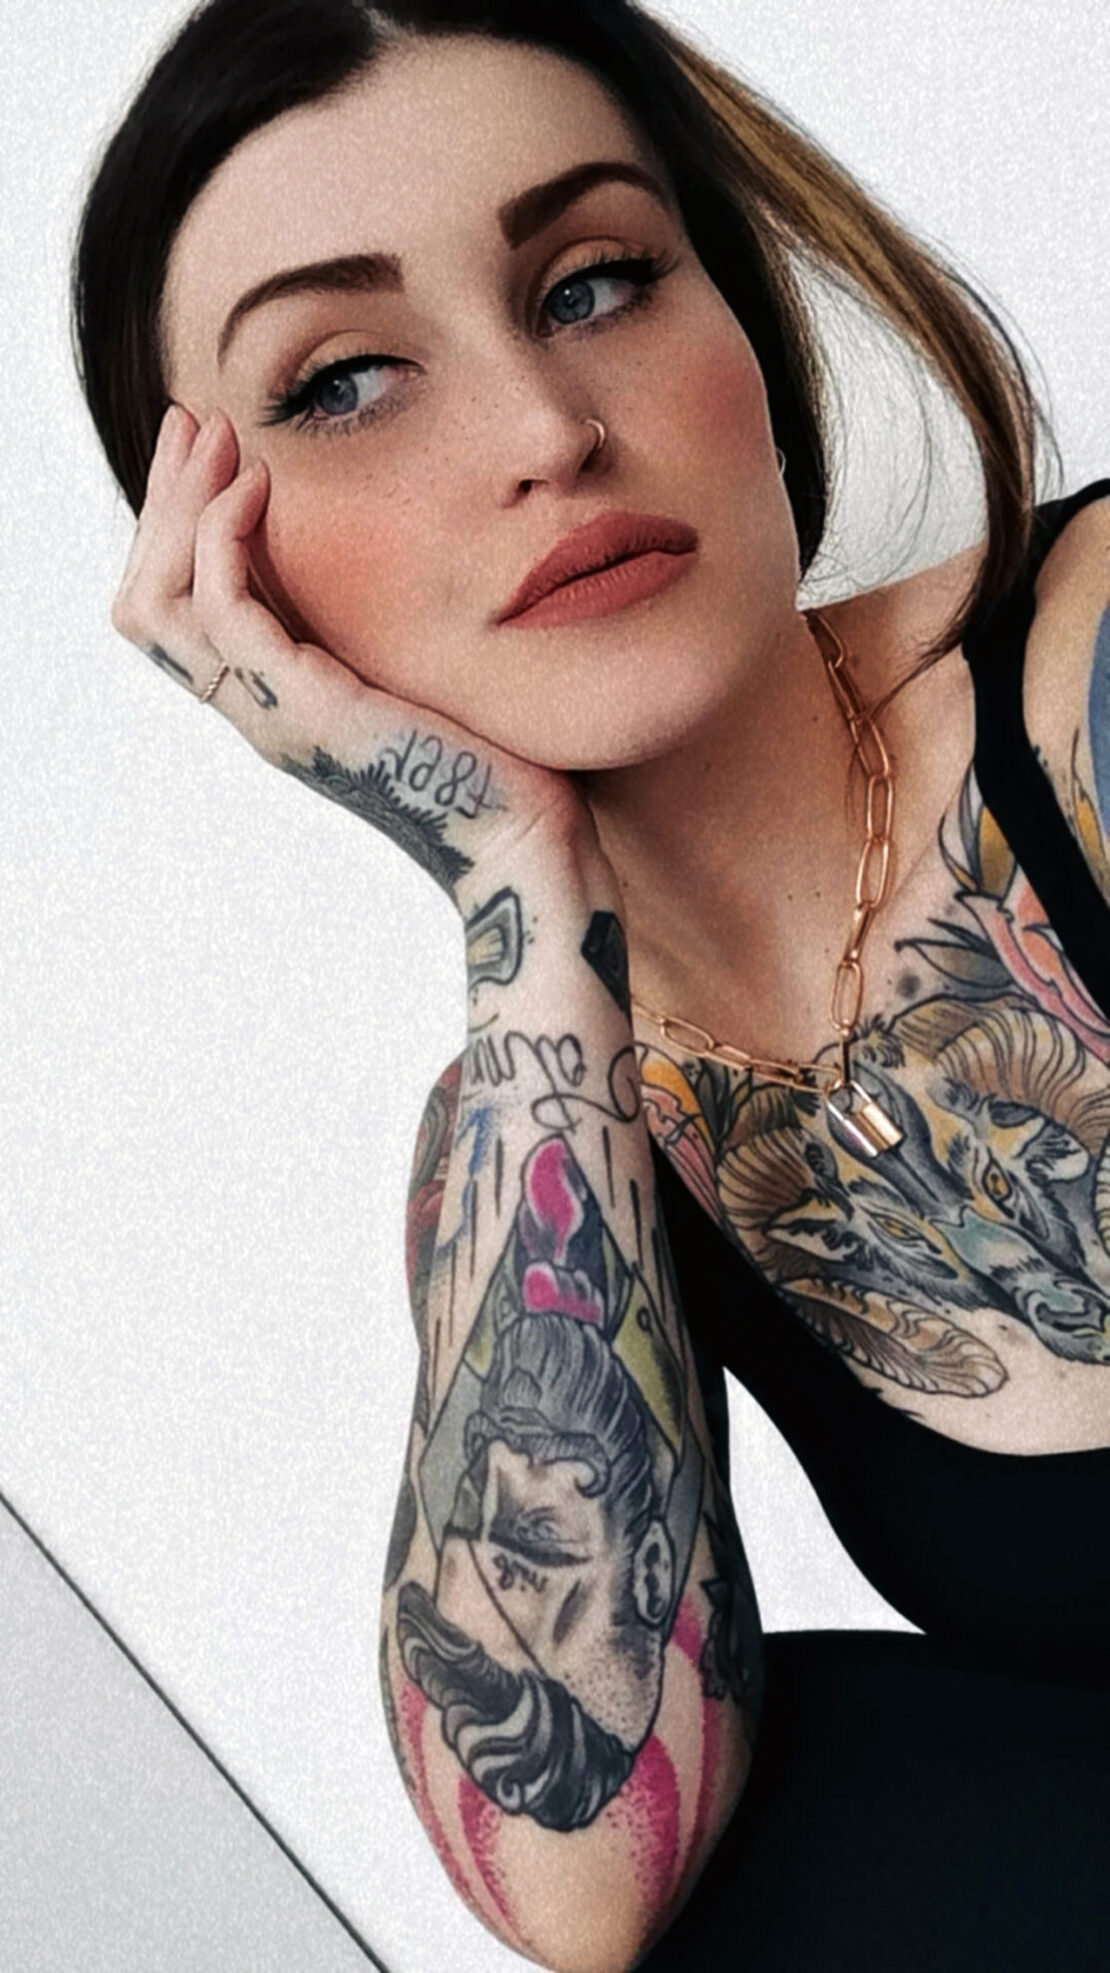 Amy, the German girl who is just crazy about Neo Traditional - Tattoo Life